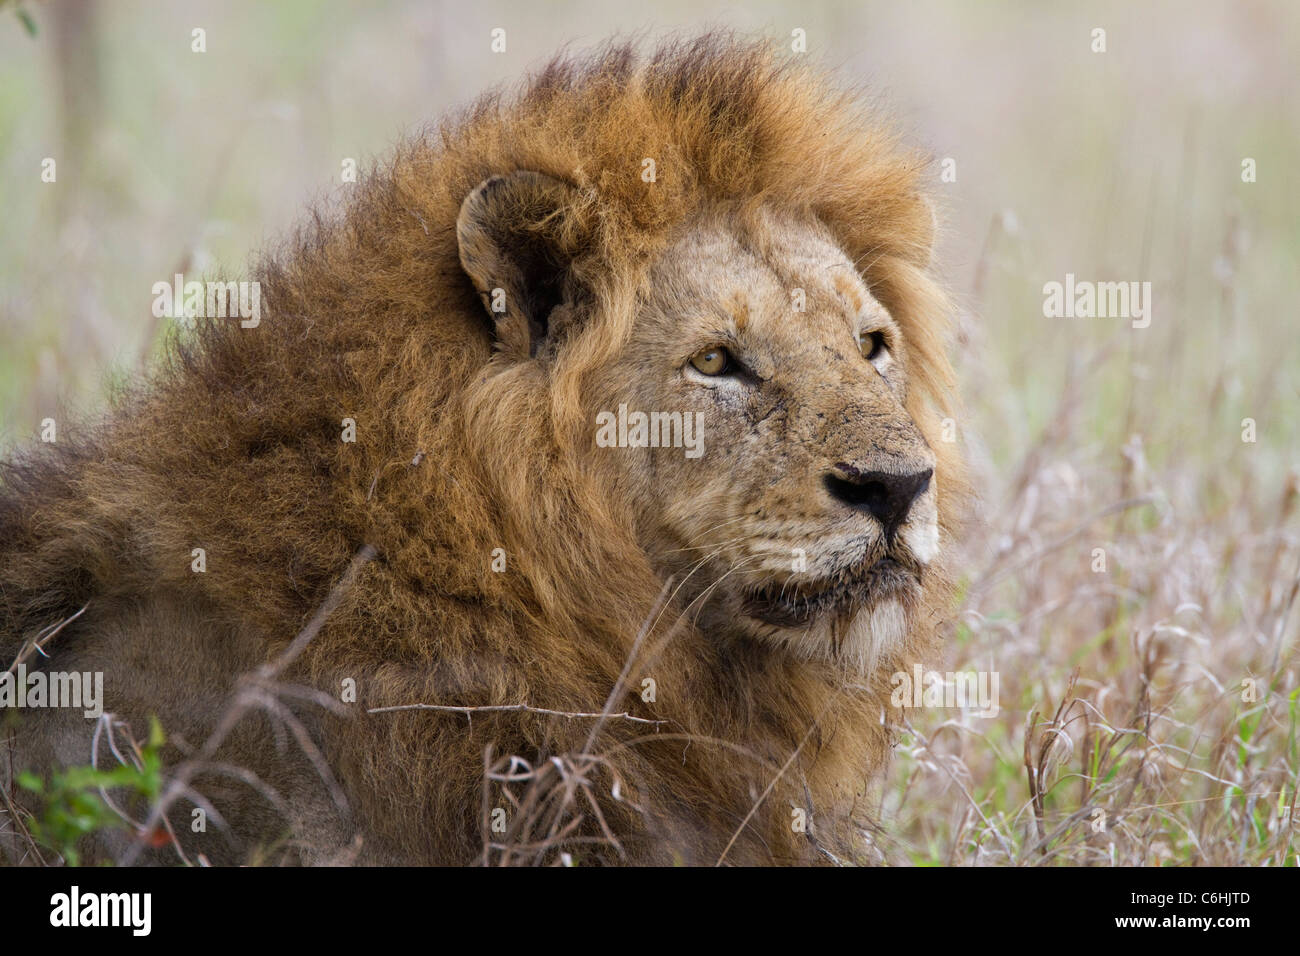 Portrait of a male lion with a large mane Stock Photo